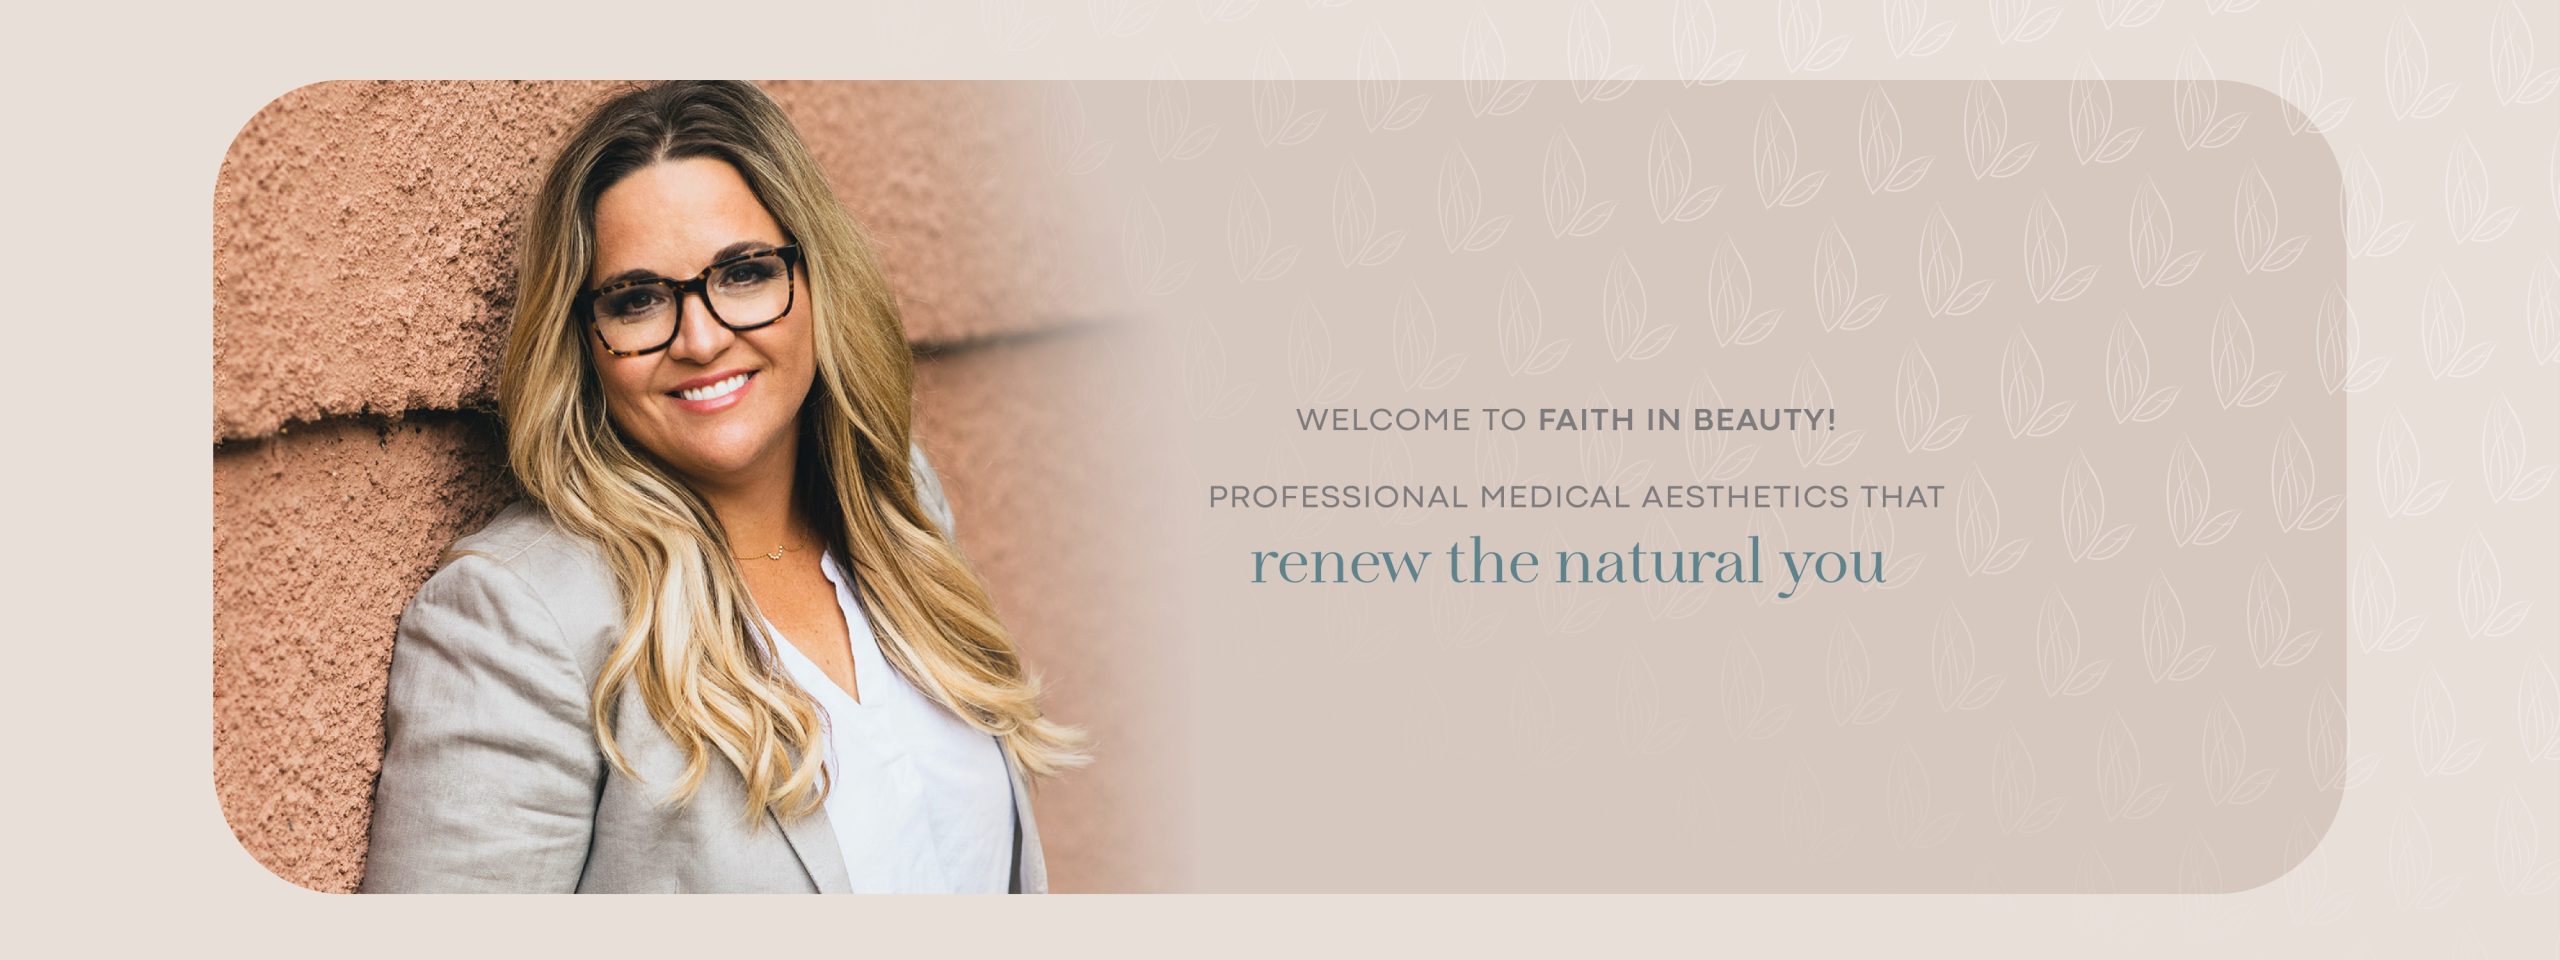 FBT Faith in Beauty Medical Aesthetics staff in Medway MA